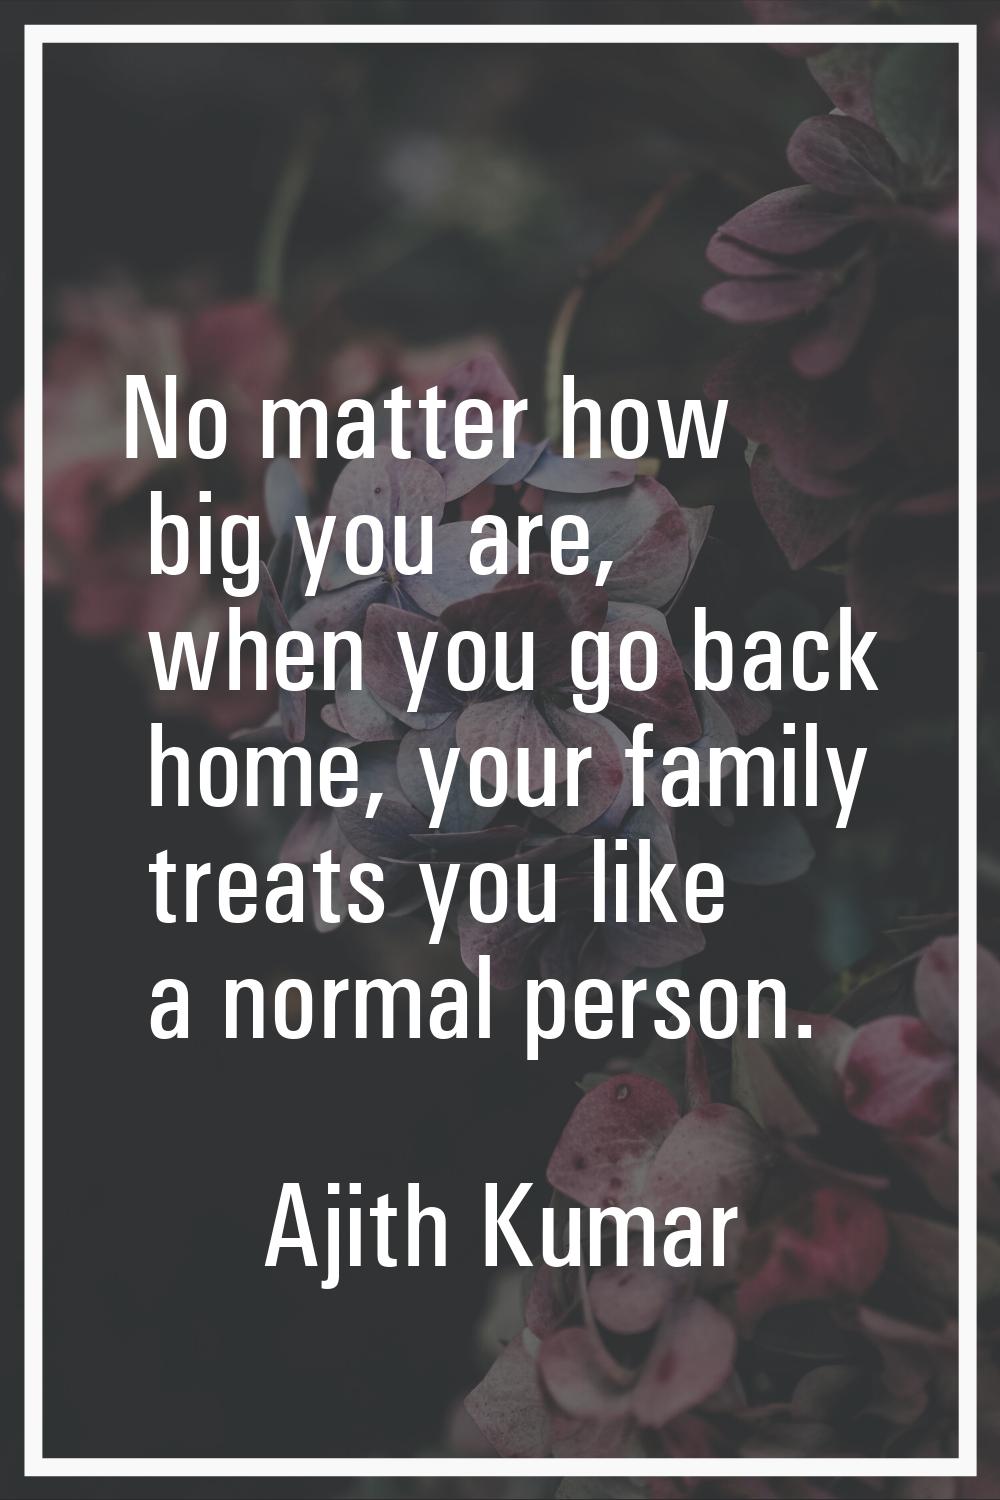 No matter how big you are, when you go back home, your family treats you like a normal person.